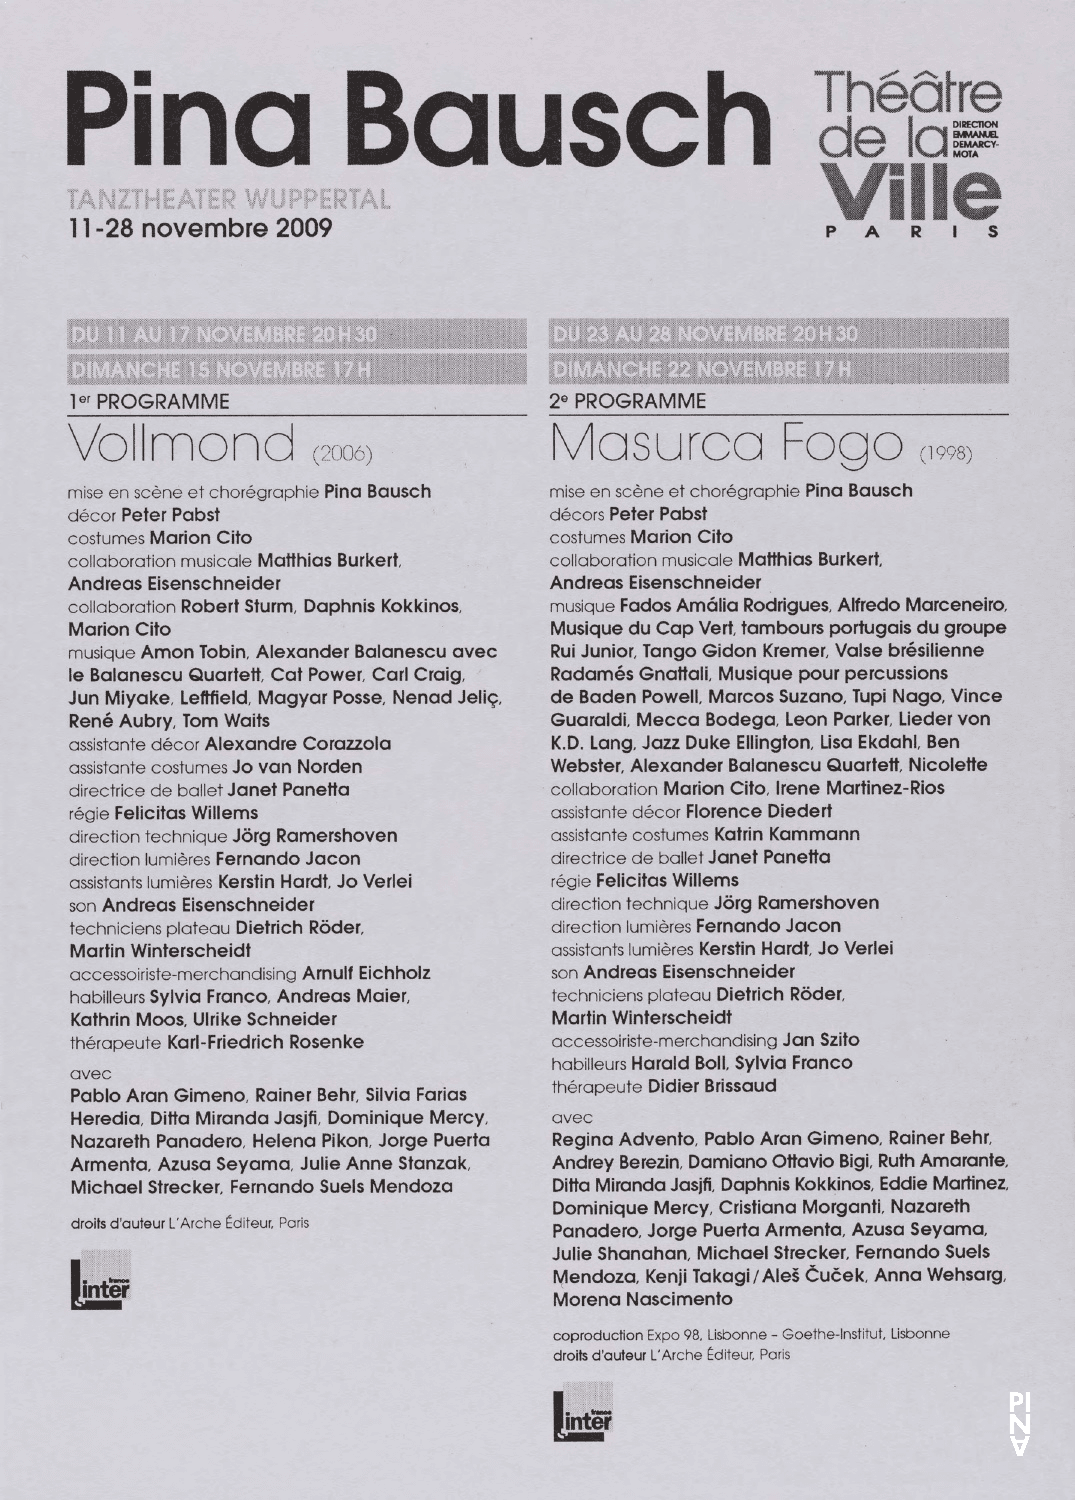 Evening leaflet for “Vollmond (Full Moon)” and “Masurca Fogo” by Pina Bausch with Tanztheater Wuppertal in in Paris, 11/11/2009 – 11/28/2009